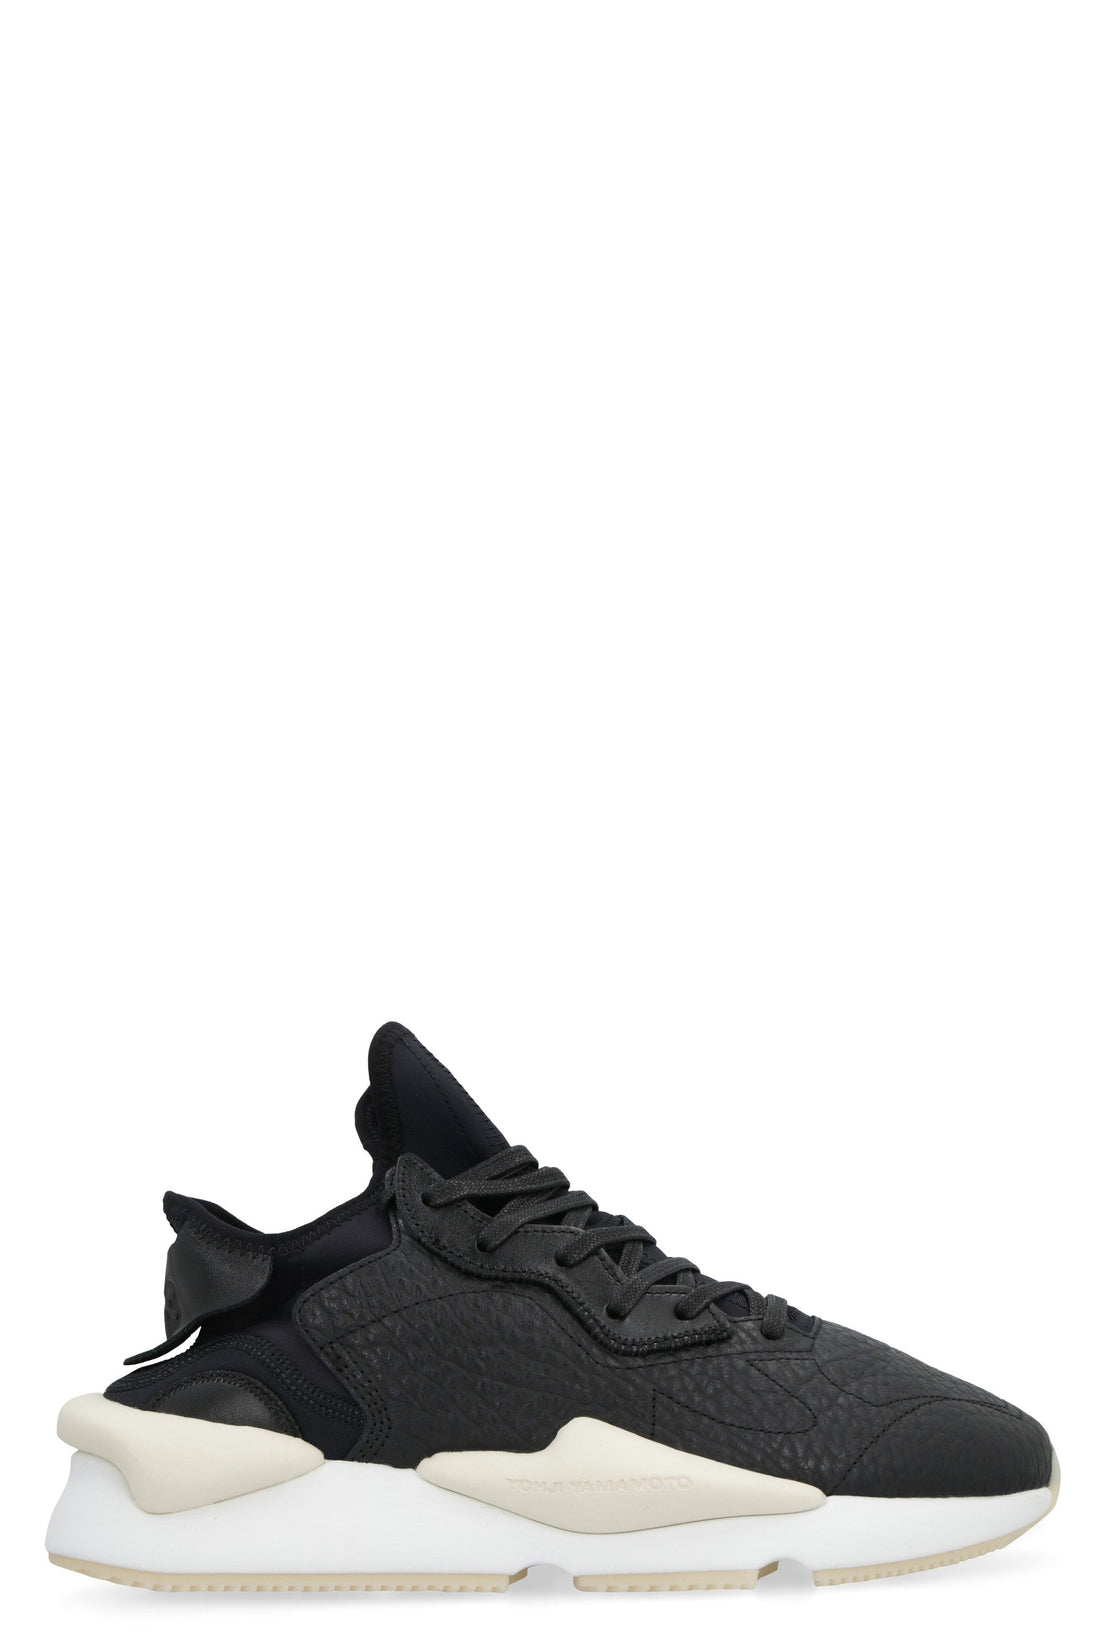 adidas-OUTLET-SALE-Kaiwa leather and fabric low-top sneakers-ARCHIVIST